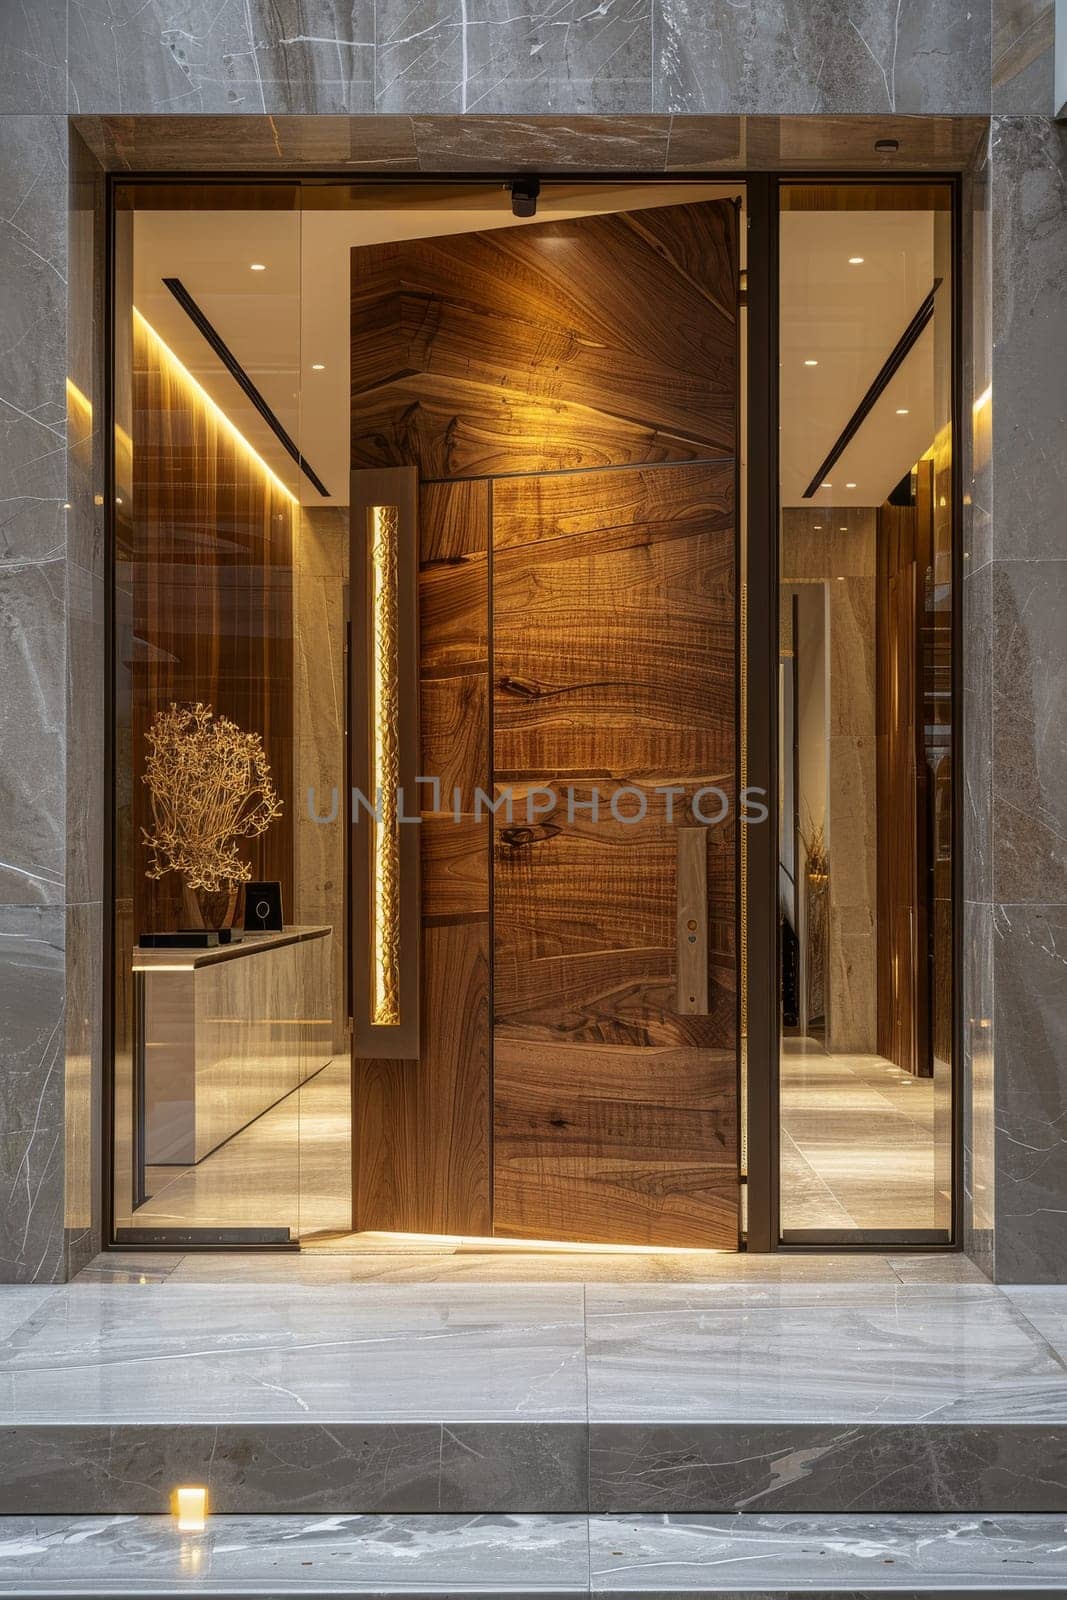 A large wooden door with a glass panel in front of it. The door is open and there is a vase on the floor in front of it. The room is well lit and has a modern feel